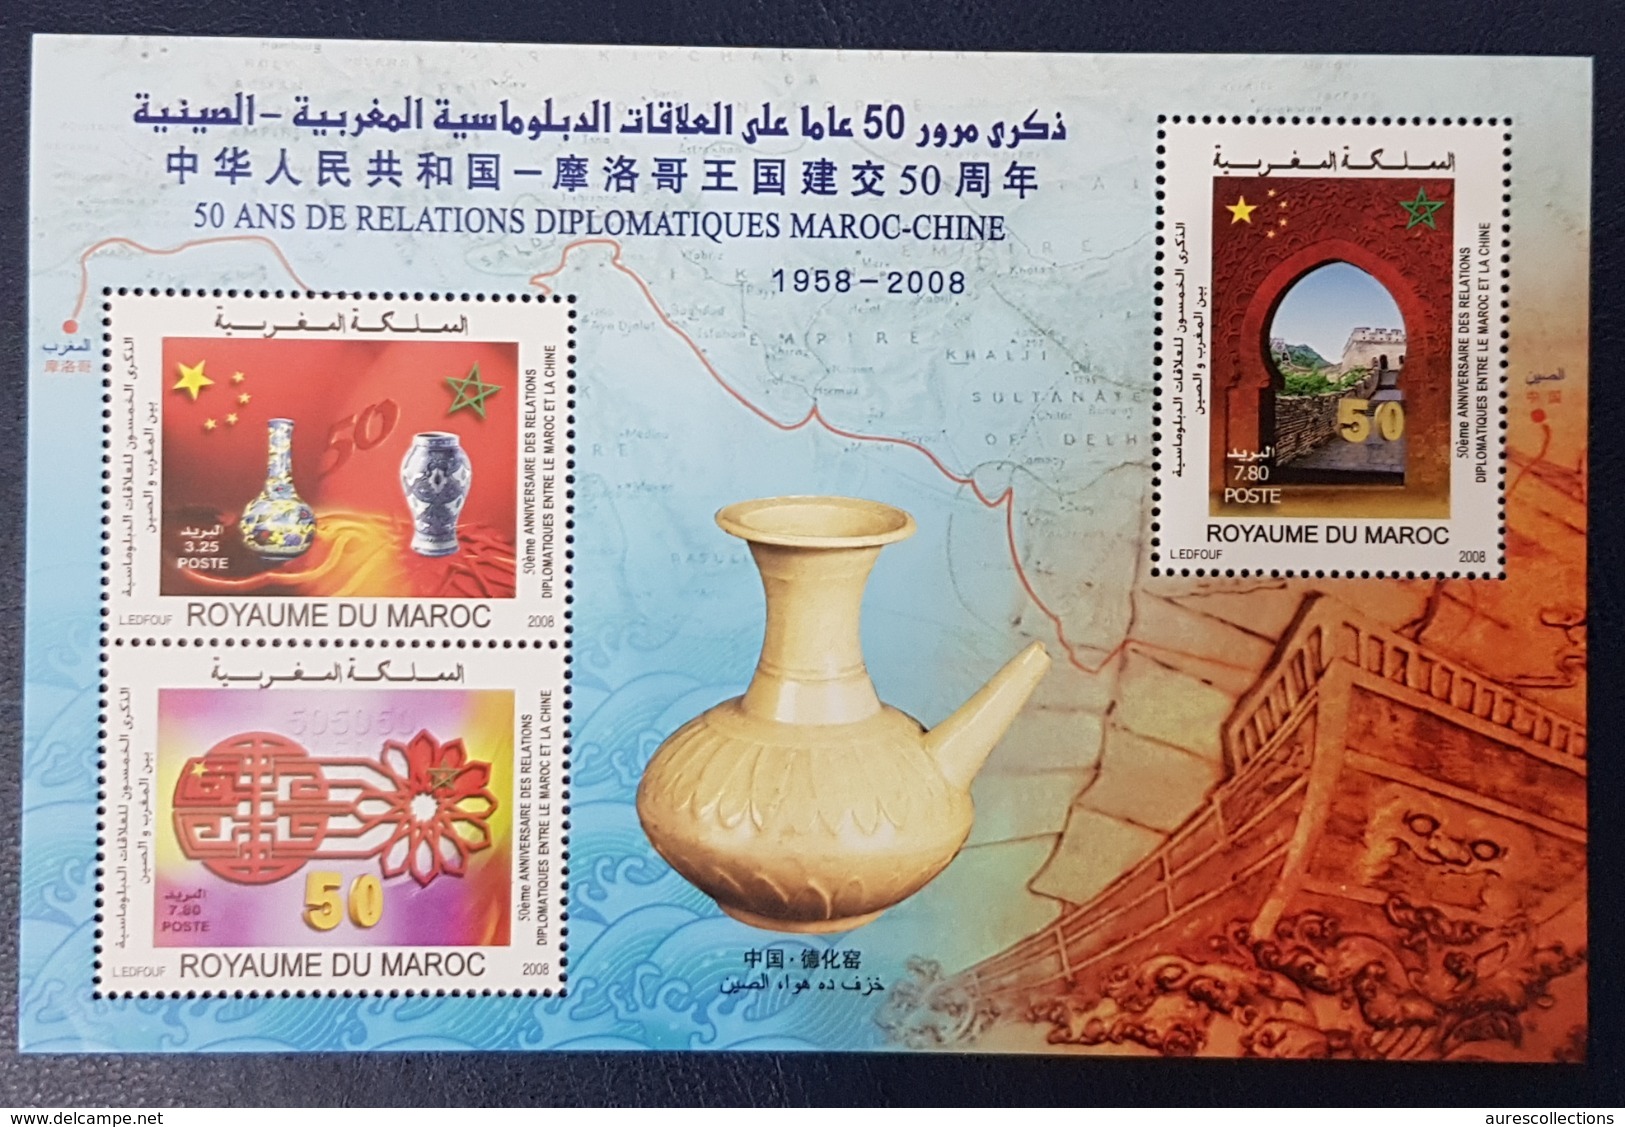 MAROC MOROCCO 2008 SHEET BLOC - 50TH ANNIV. DIPLOMATIC RELATIONS CHINA CHINE POTTERY  - JOINT ISSUE -  RARE MNH - Emissions Communes